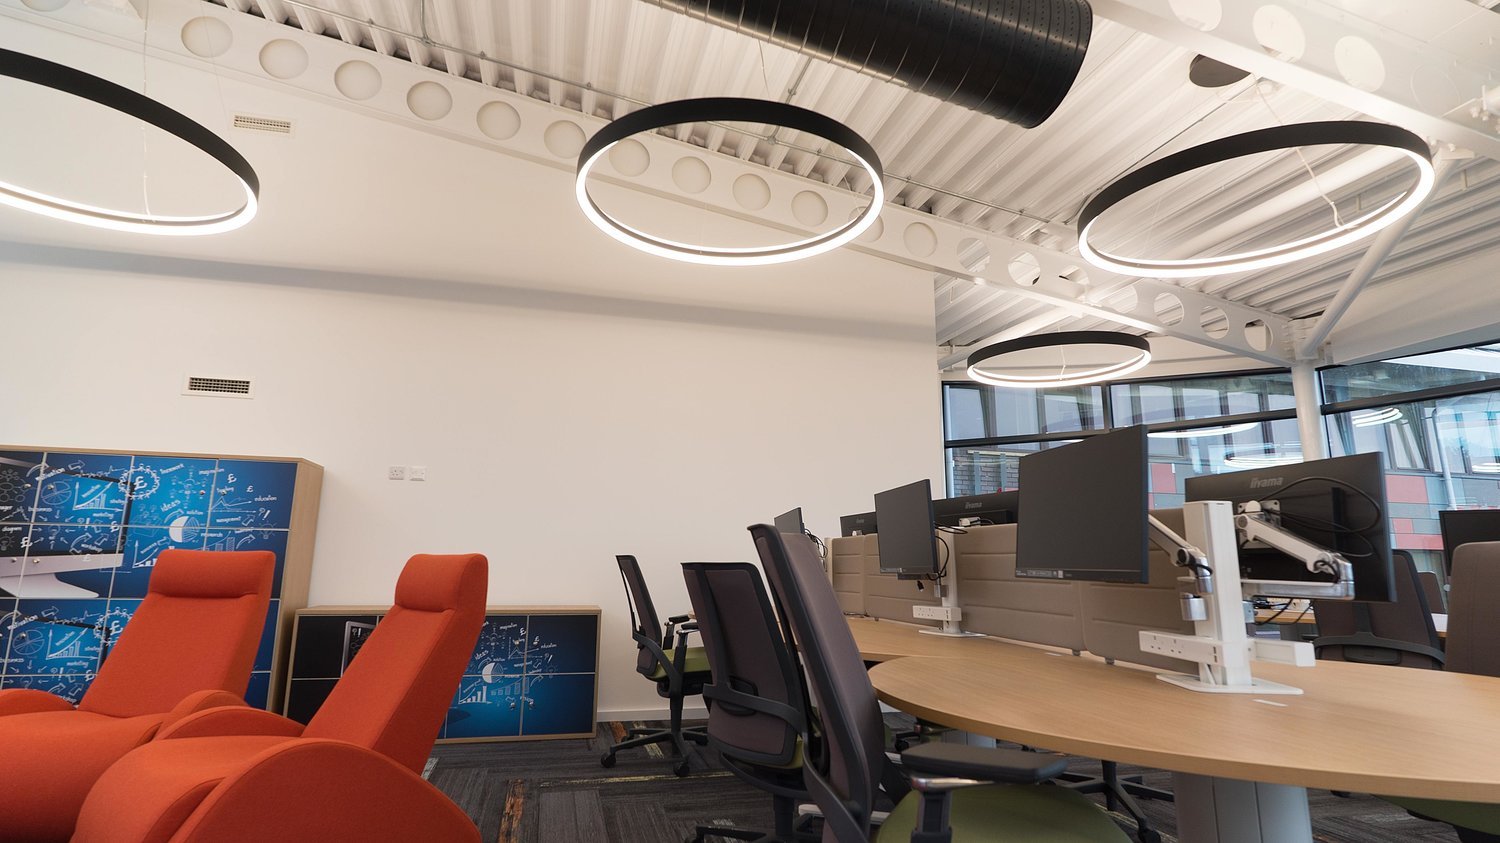 Office lighting scheme using indirect lighting only at Office for National Statistics (ONS), Newport.